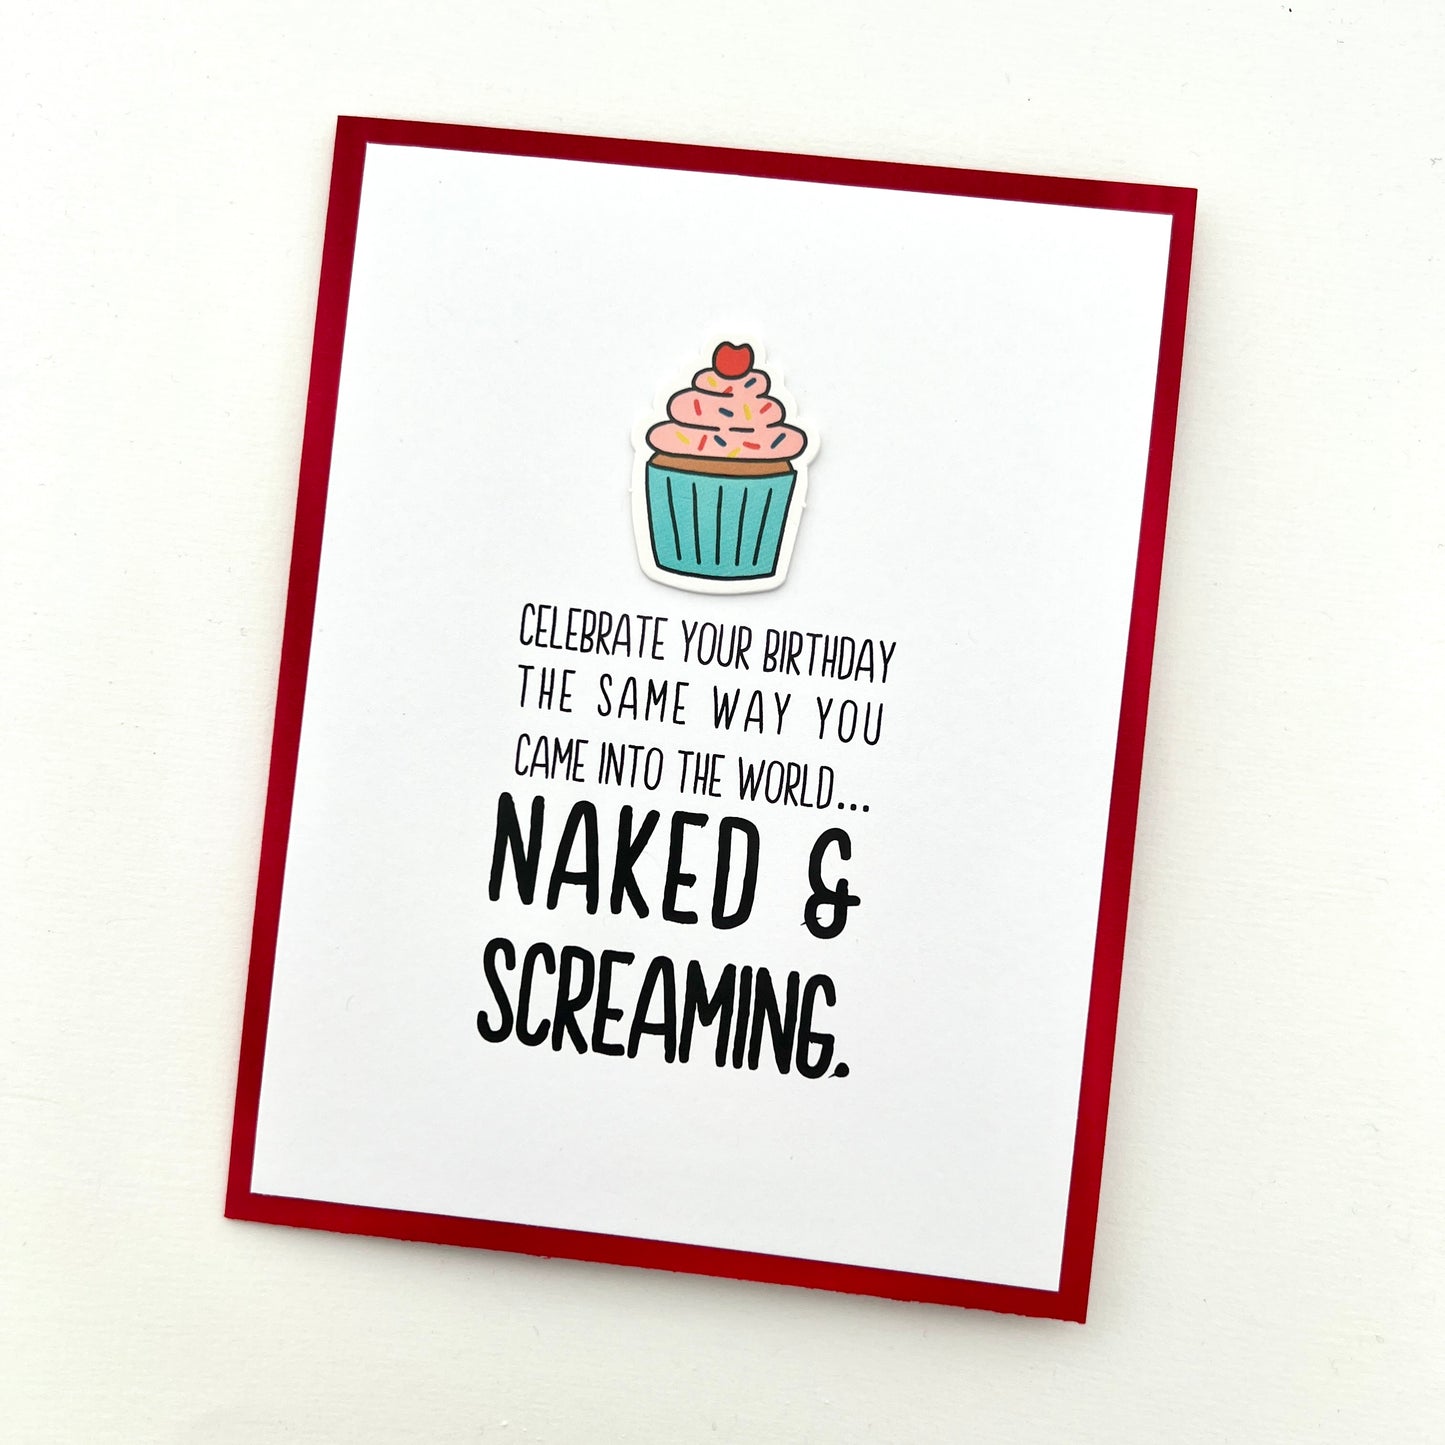 Naked and Screaming card